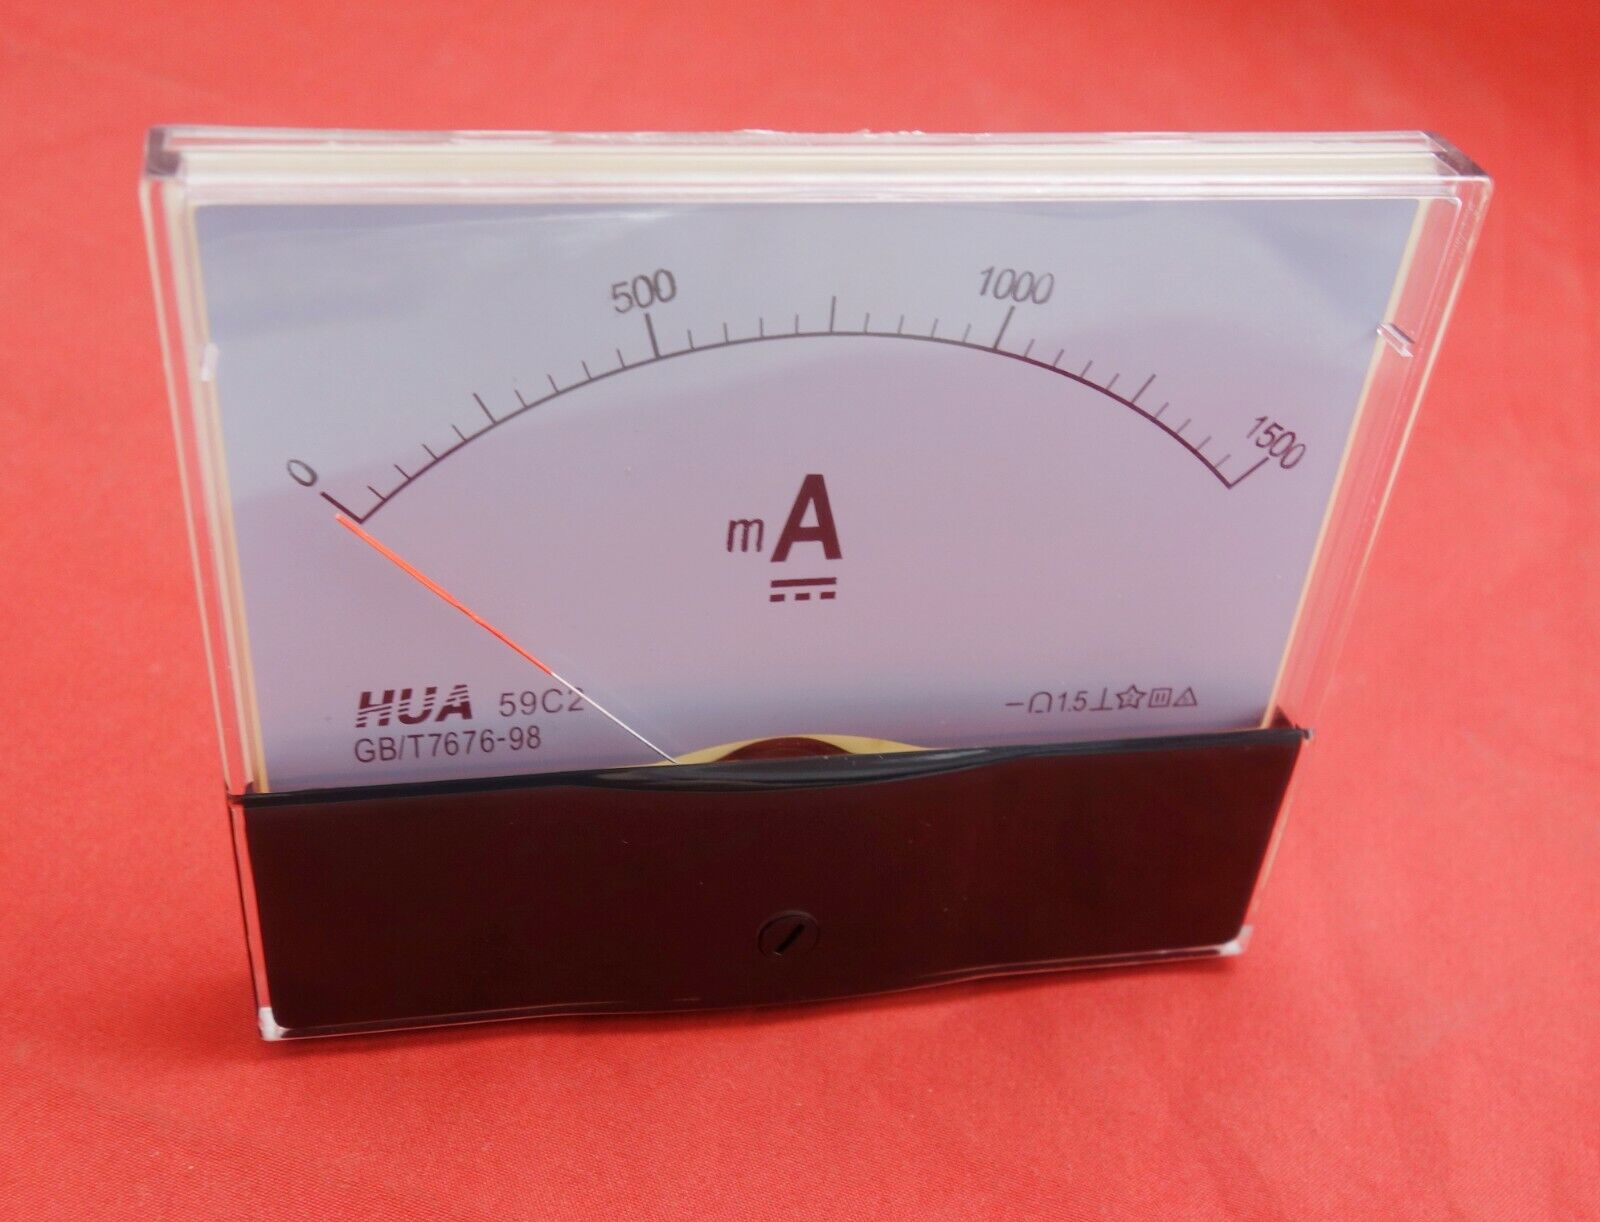 1PC Analog Ammeter Panel AMP Current Meter 100x120mm 59C2 DC 0-1500mA